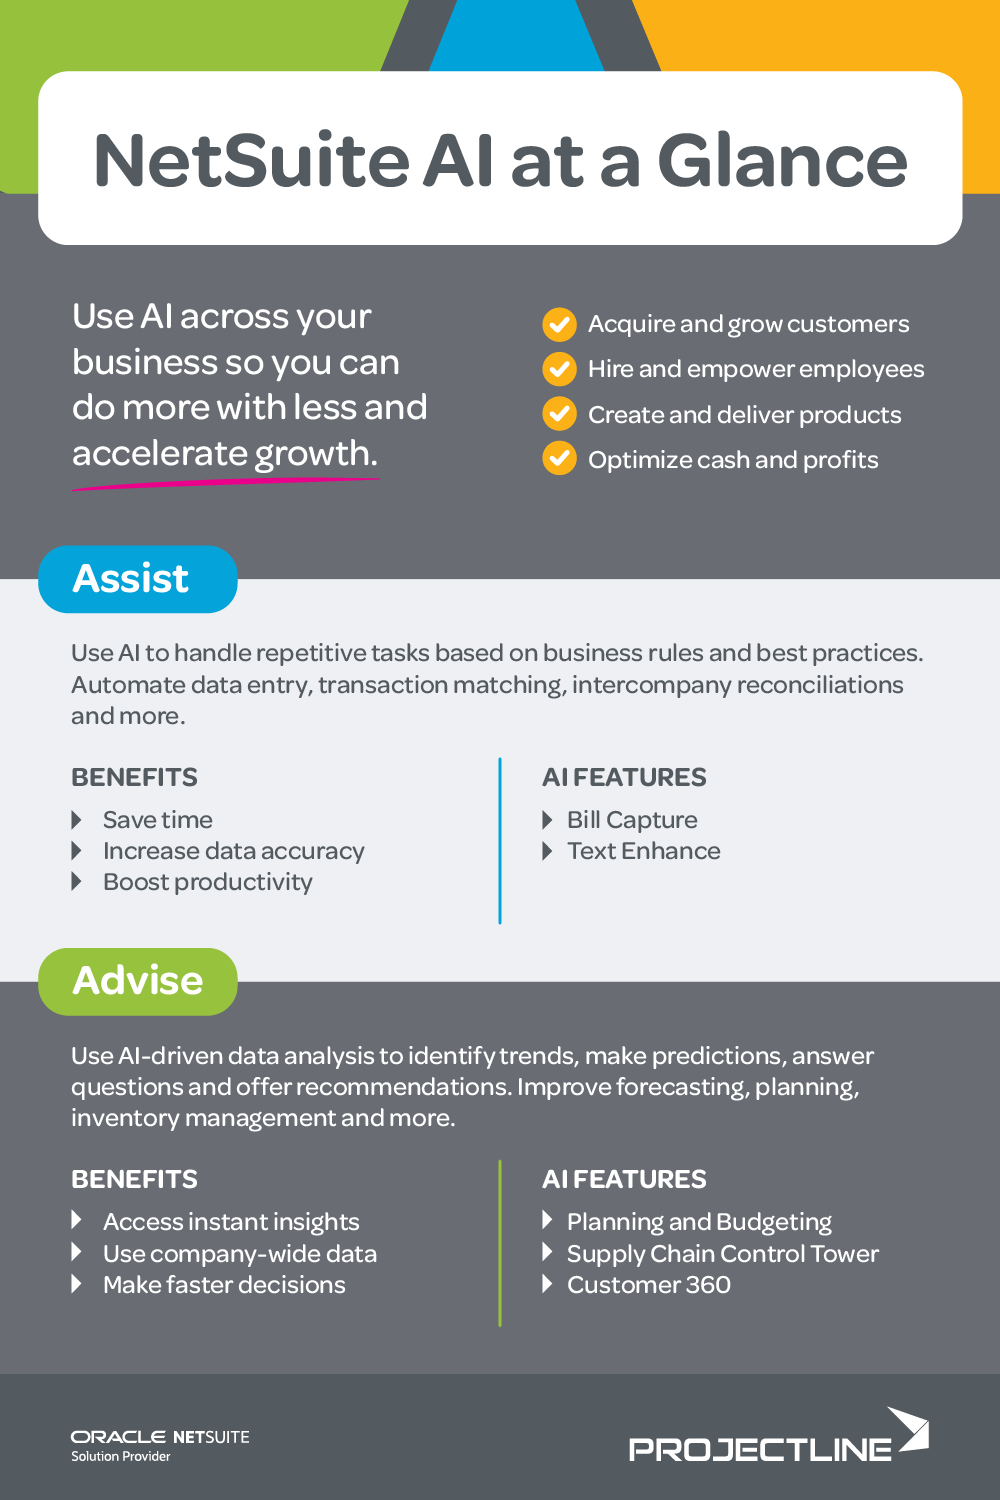 NetSuite AI Features at a Glance [Infographic]